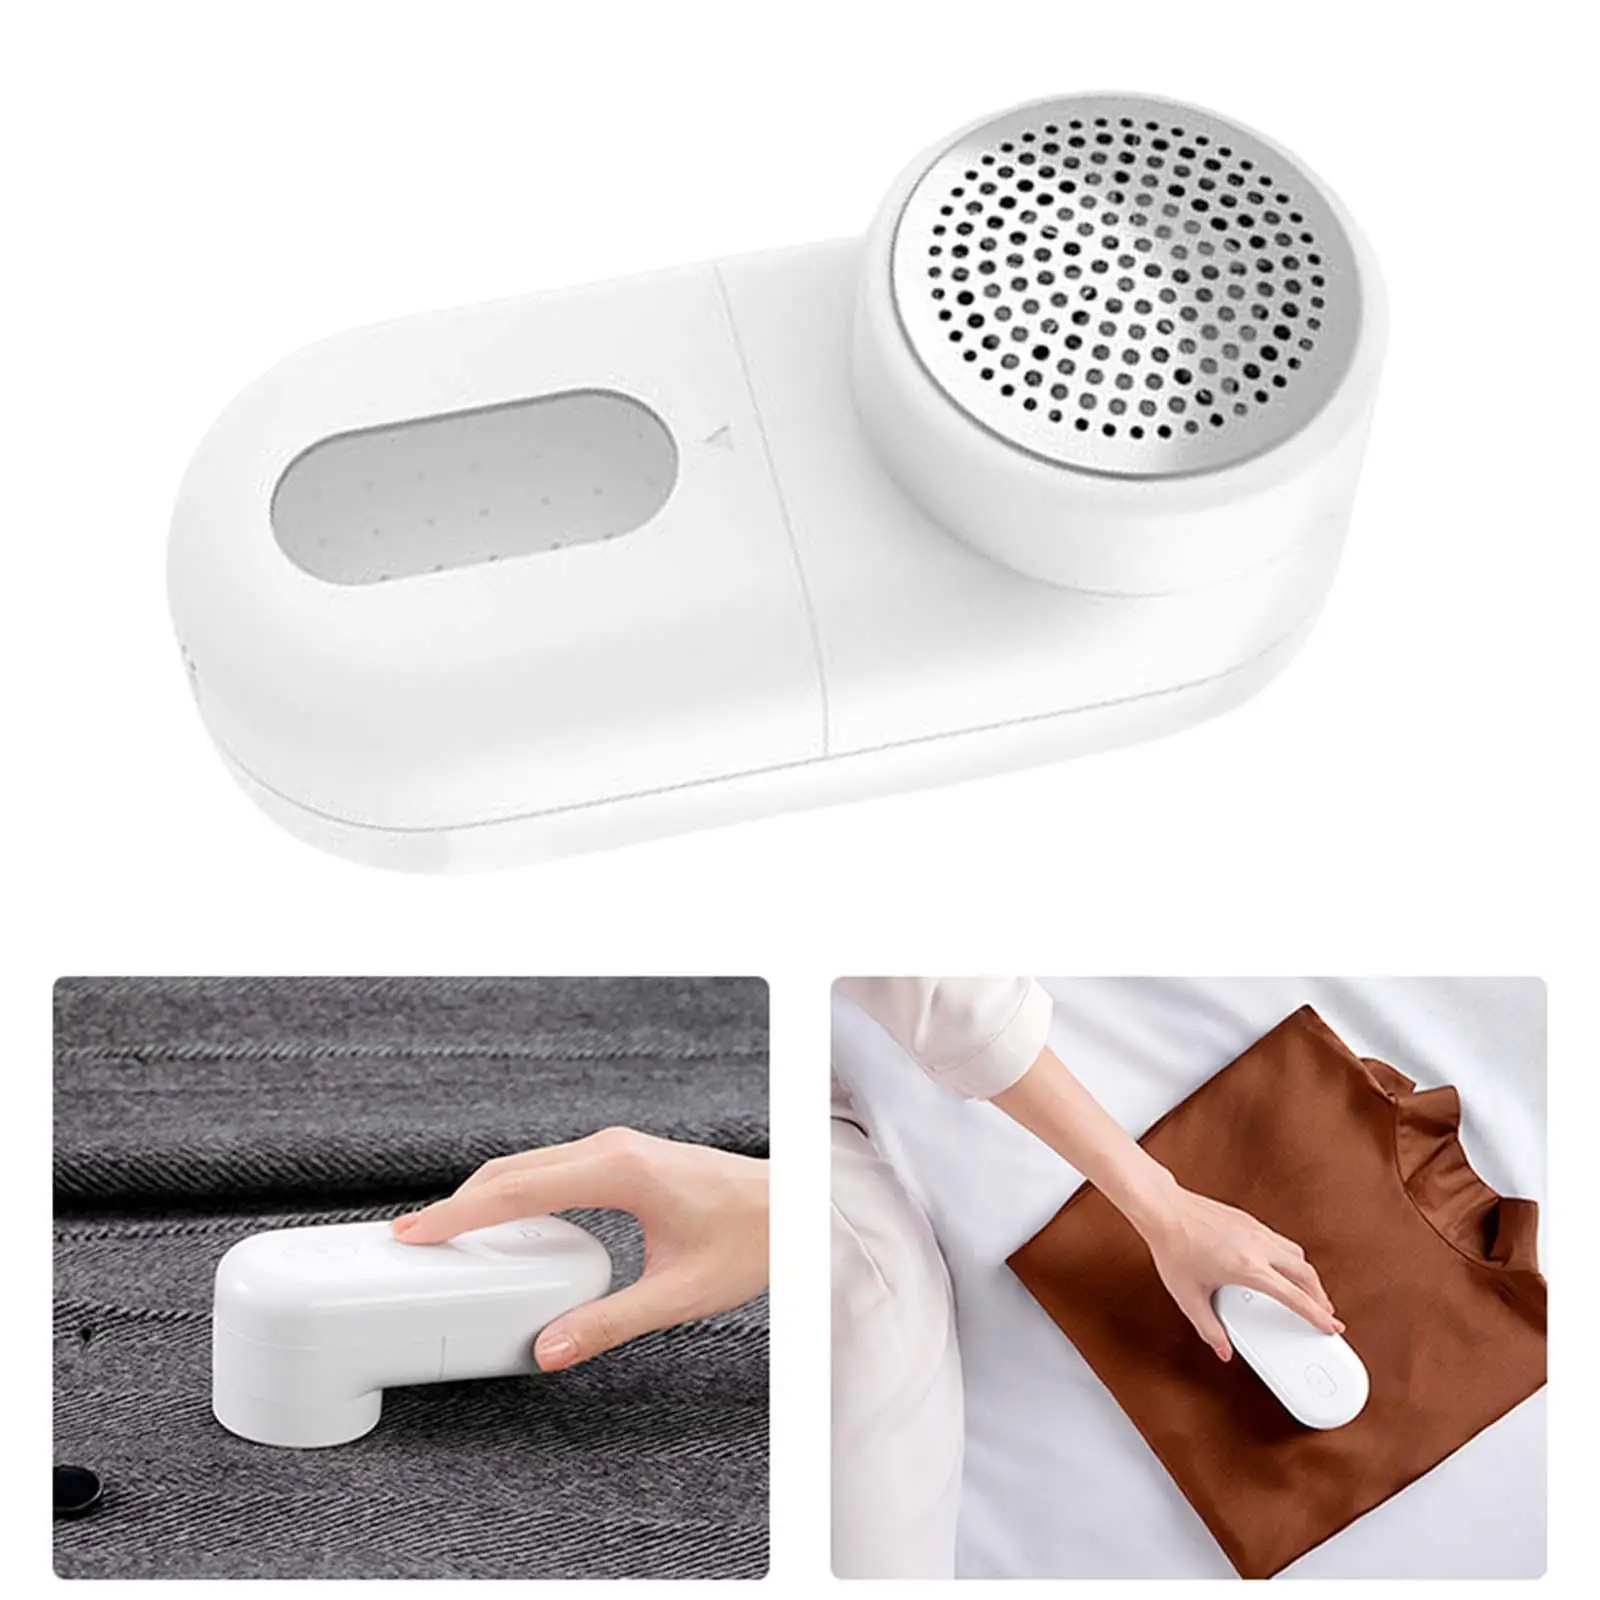 Lint Remover 5 Leaf Blades with Brush Pet Hair Pilling Remover Tool Electric Clothes Sweater Fabric Shaver Fuzz Remover Clothes